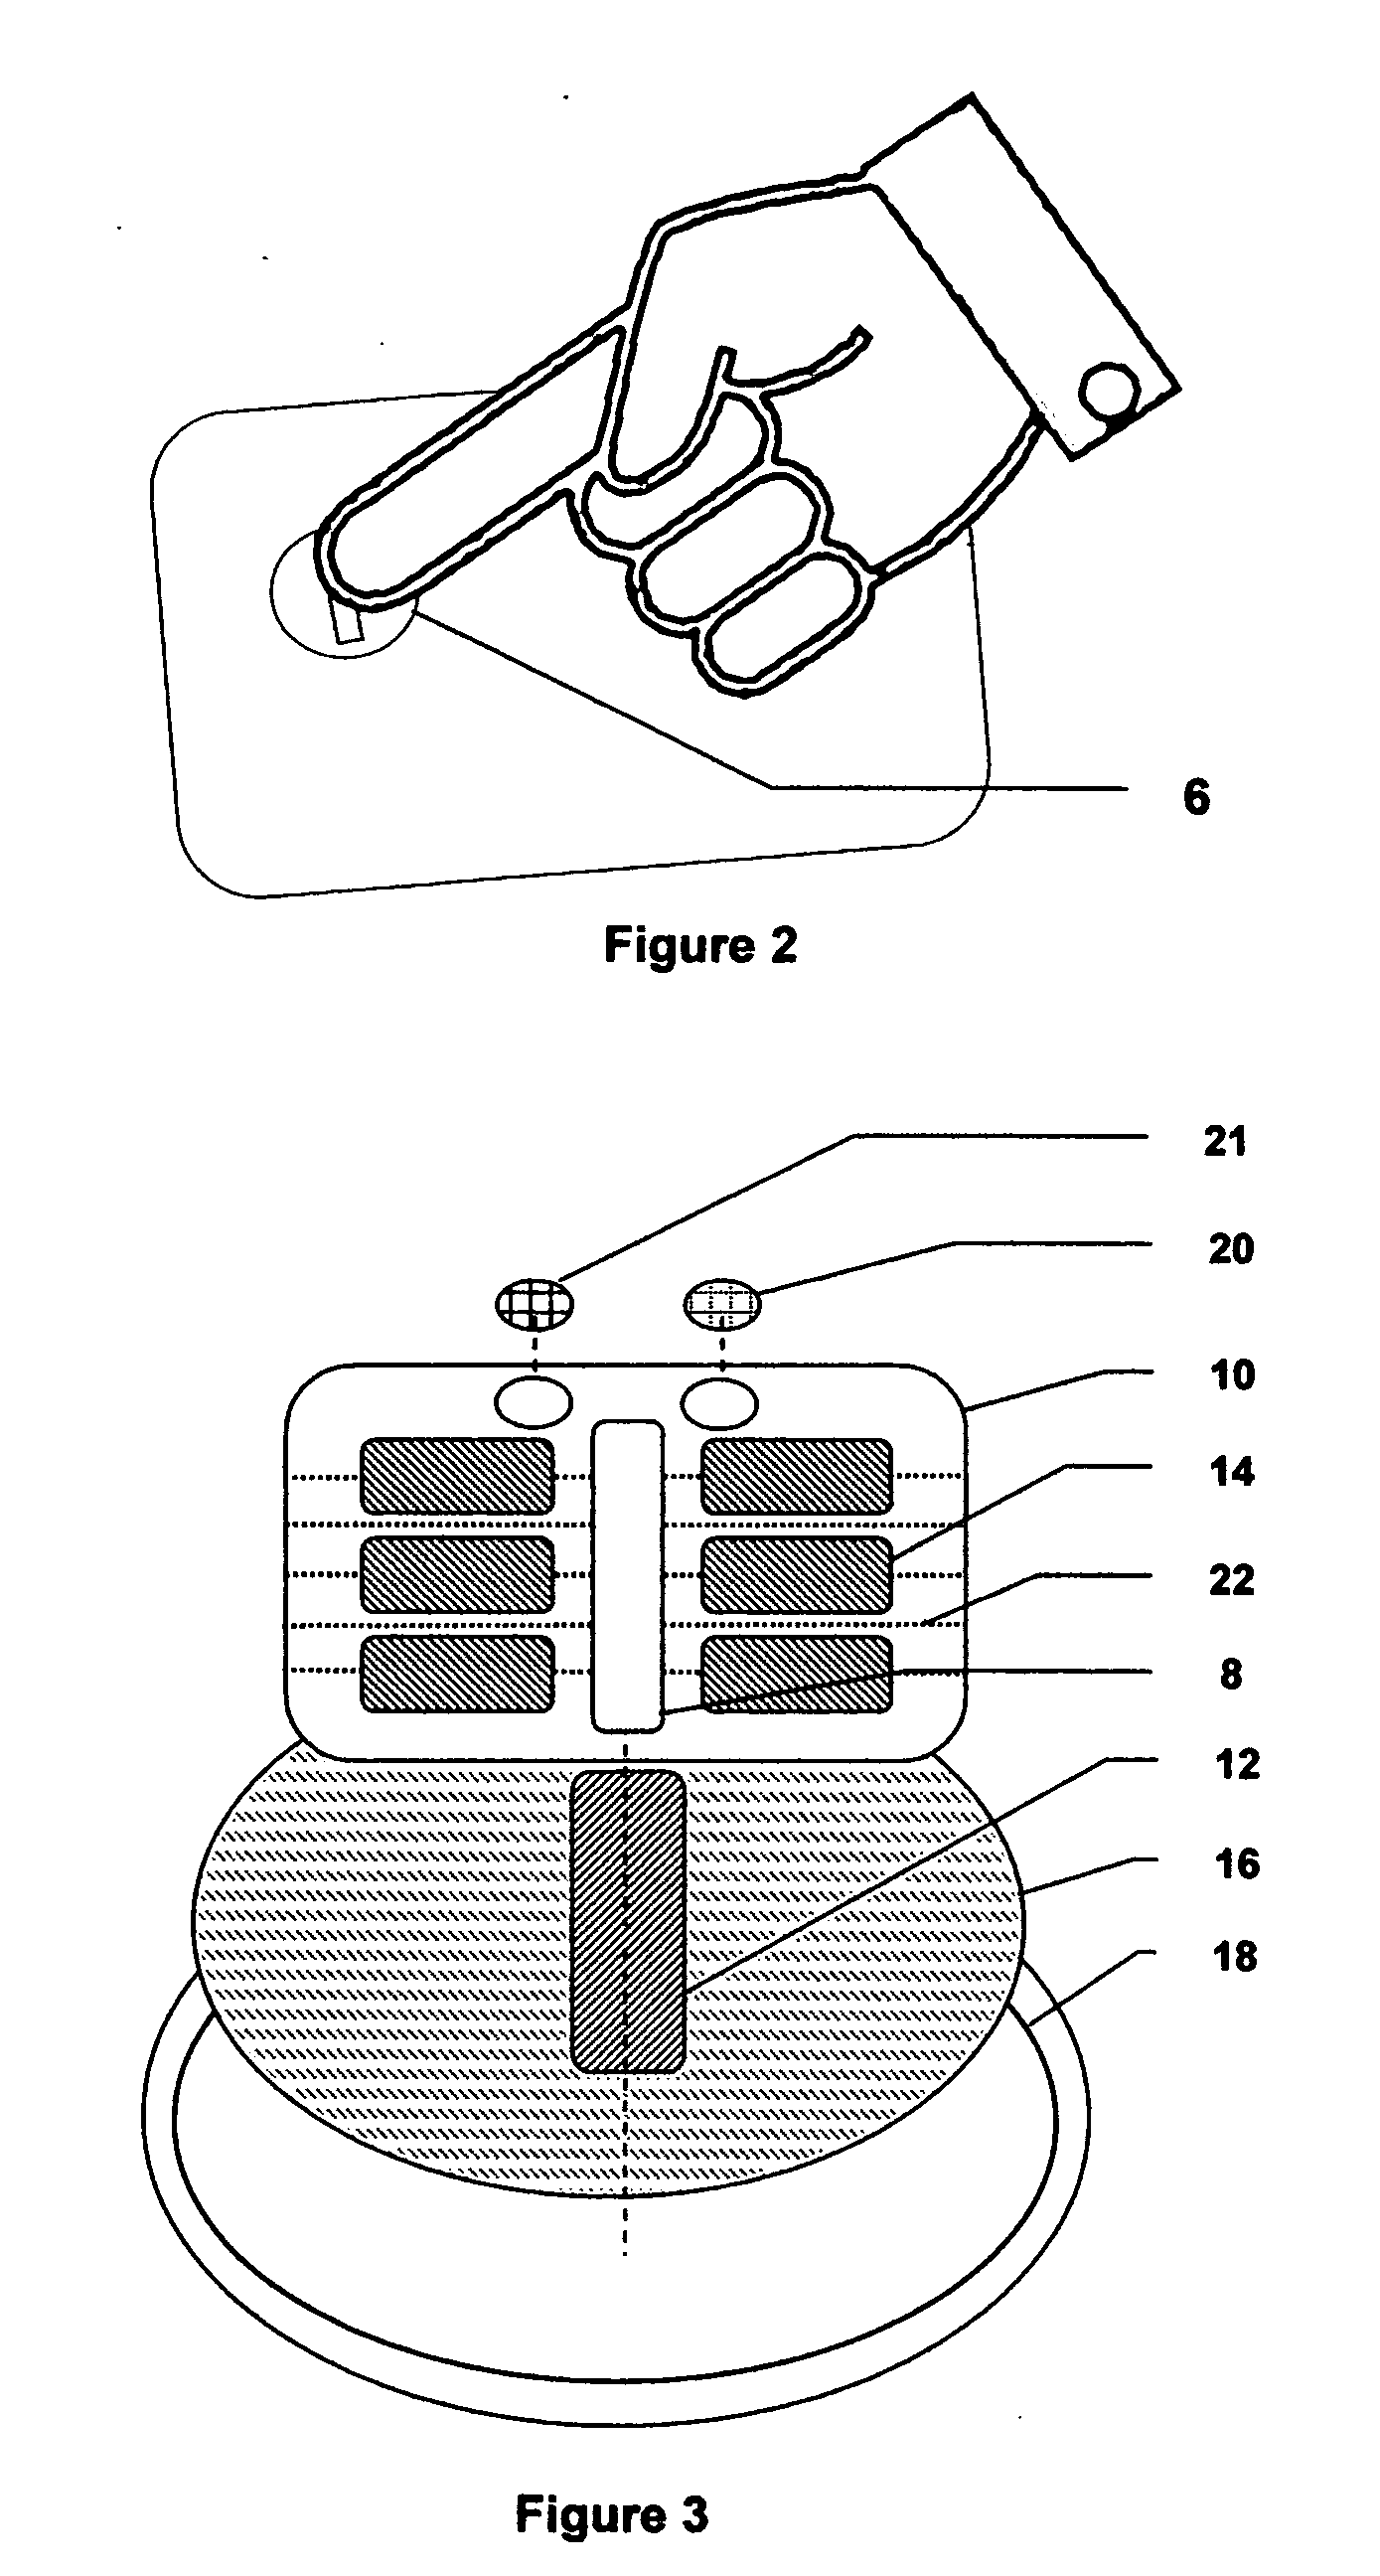 Design & method for manufacturing low-cost smartcards with embedded fingerprint authentication system modules